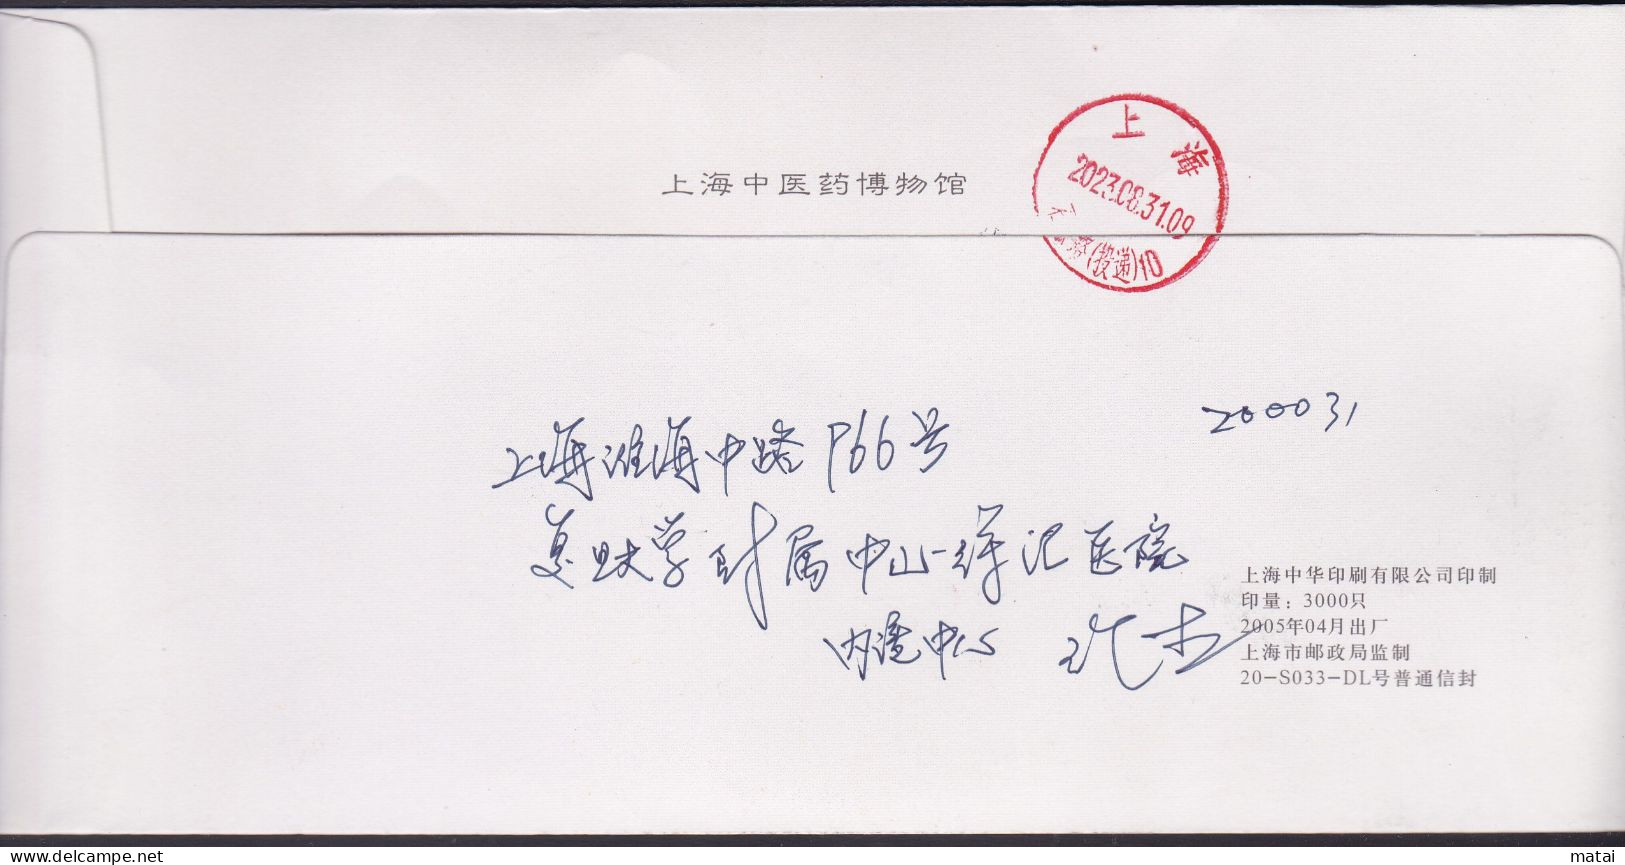 CHINA 2023.08.28 Shanghai Museum Of Traditional Chinese Medicine  METER STAMP COVER - Storia Postale